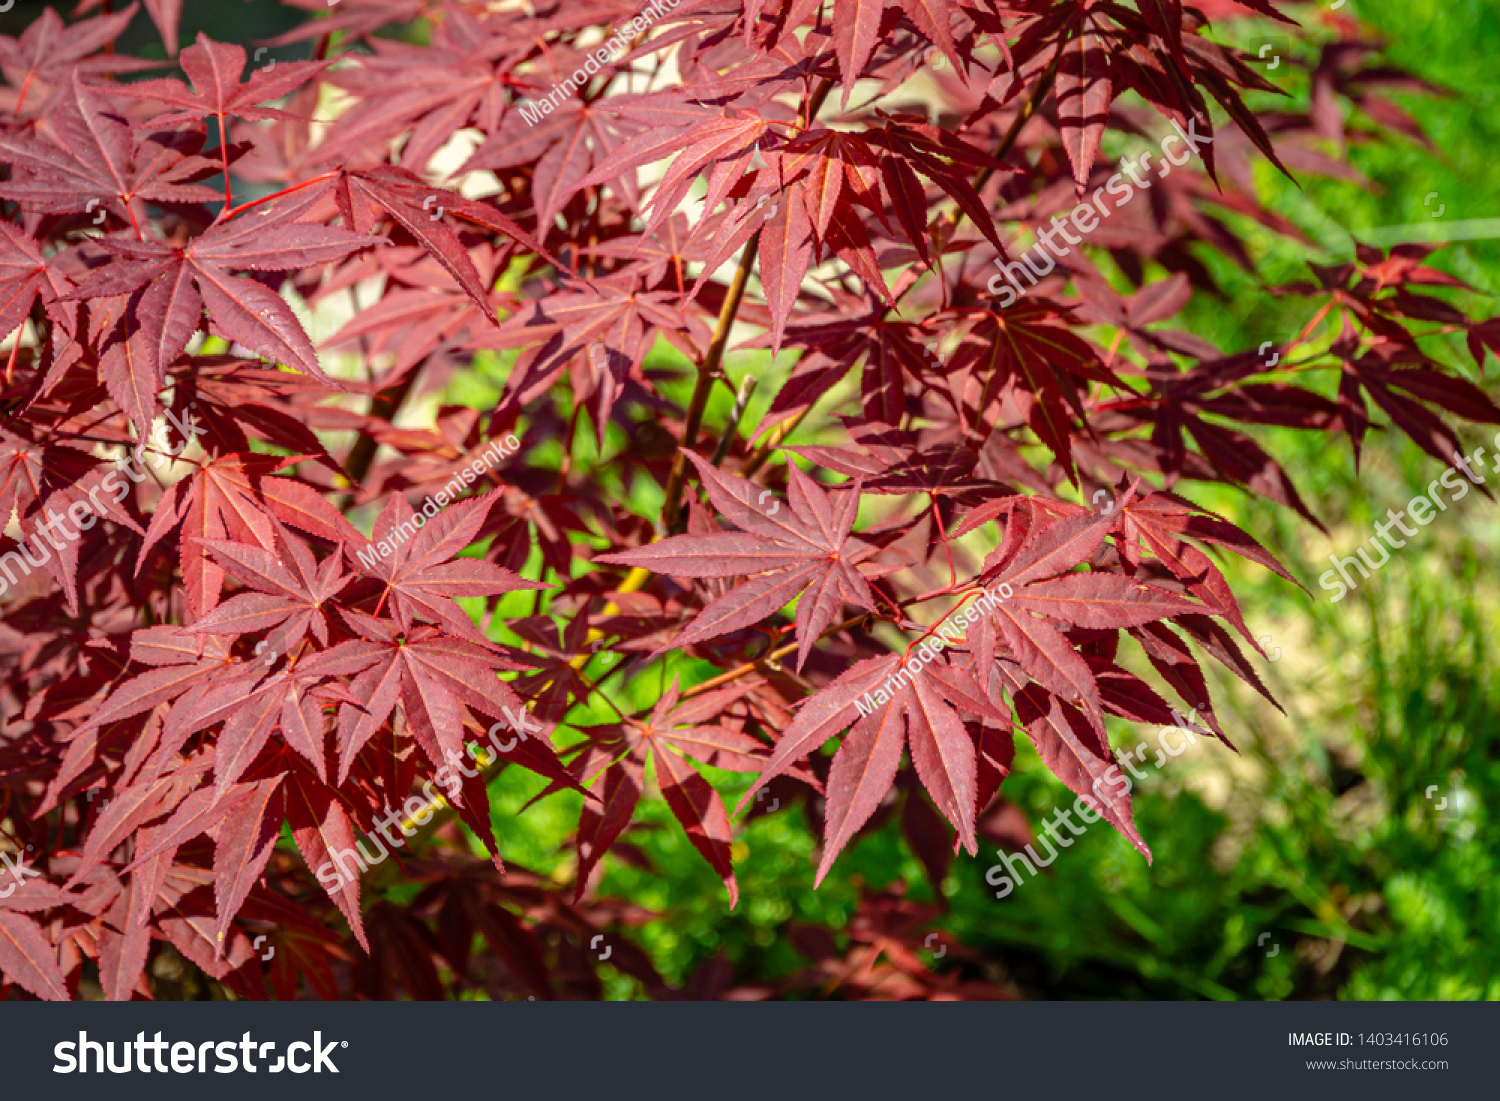 Close-up of graceful red leaves of Japanese Maple, Acer palmatum Atropurpureum tree with purple leaves in beautiful spring garden #1403416106